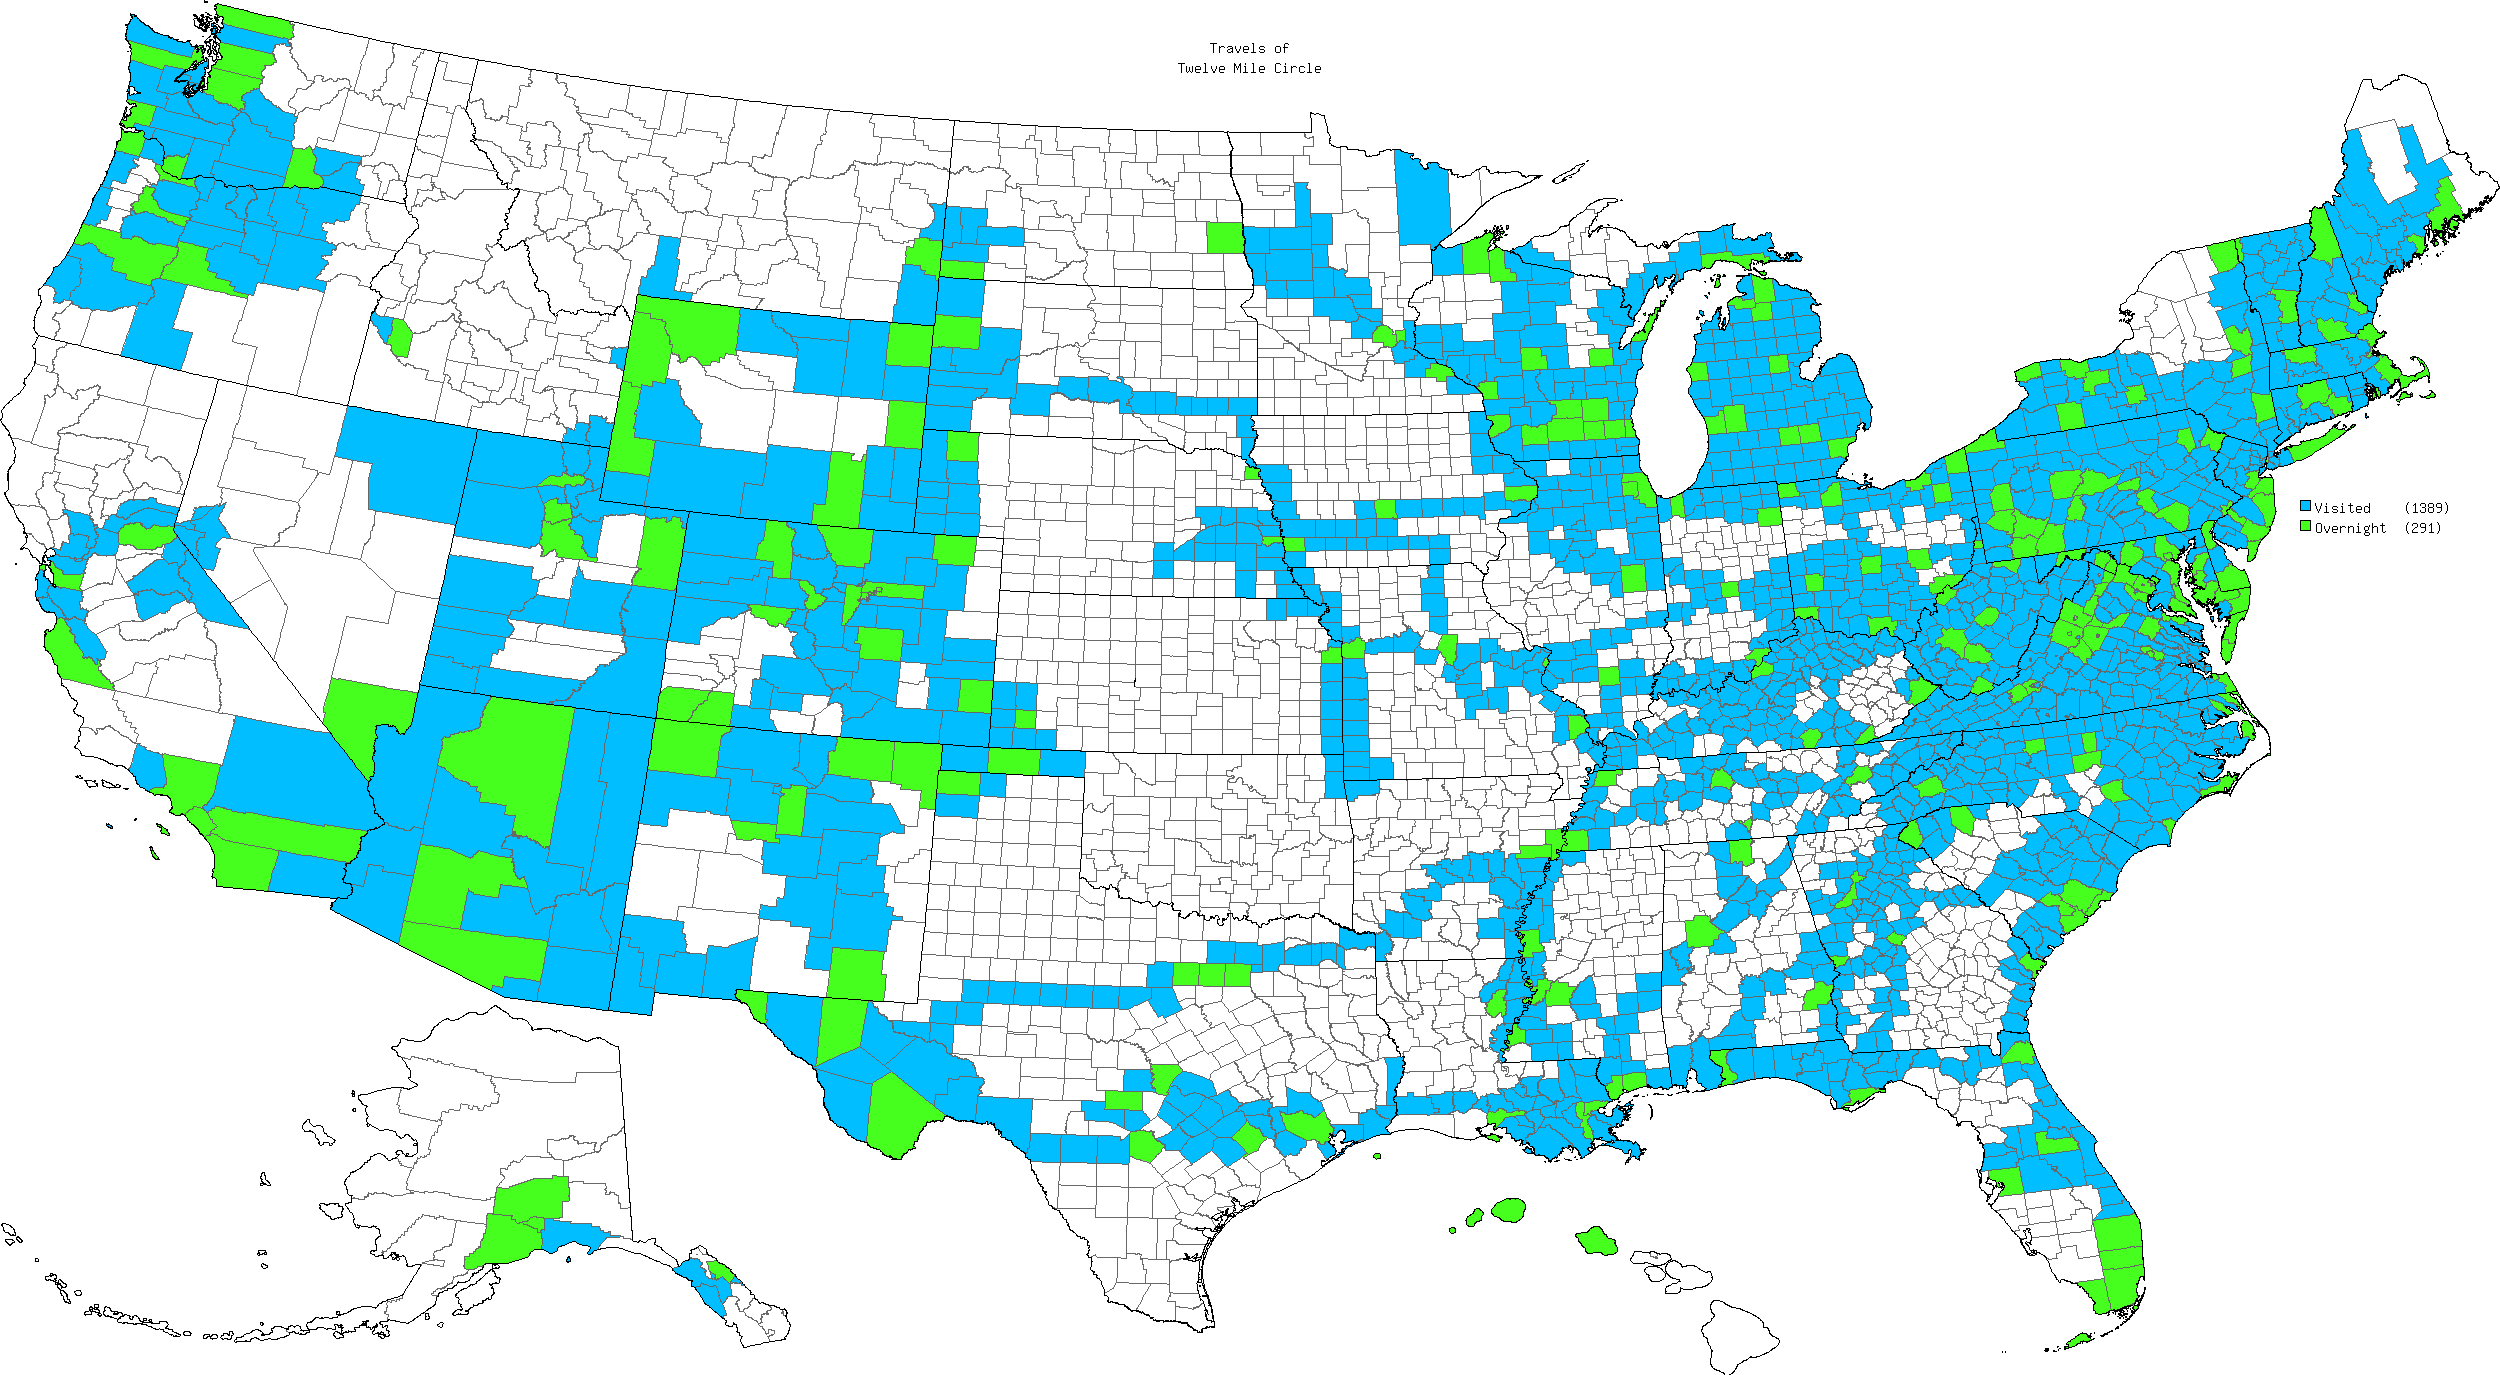 Counties in the United States that I have Visited. Map produced using mob-rule.com